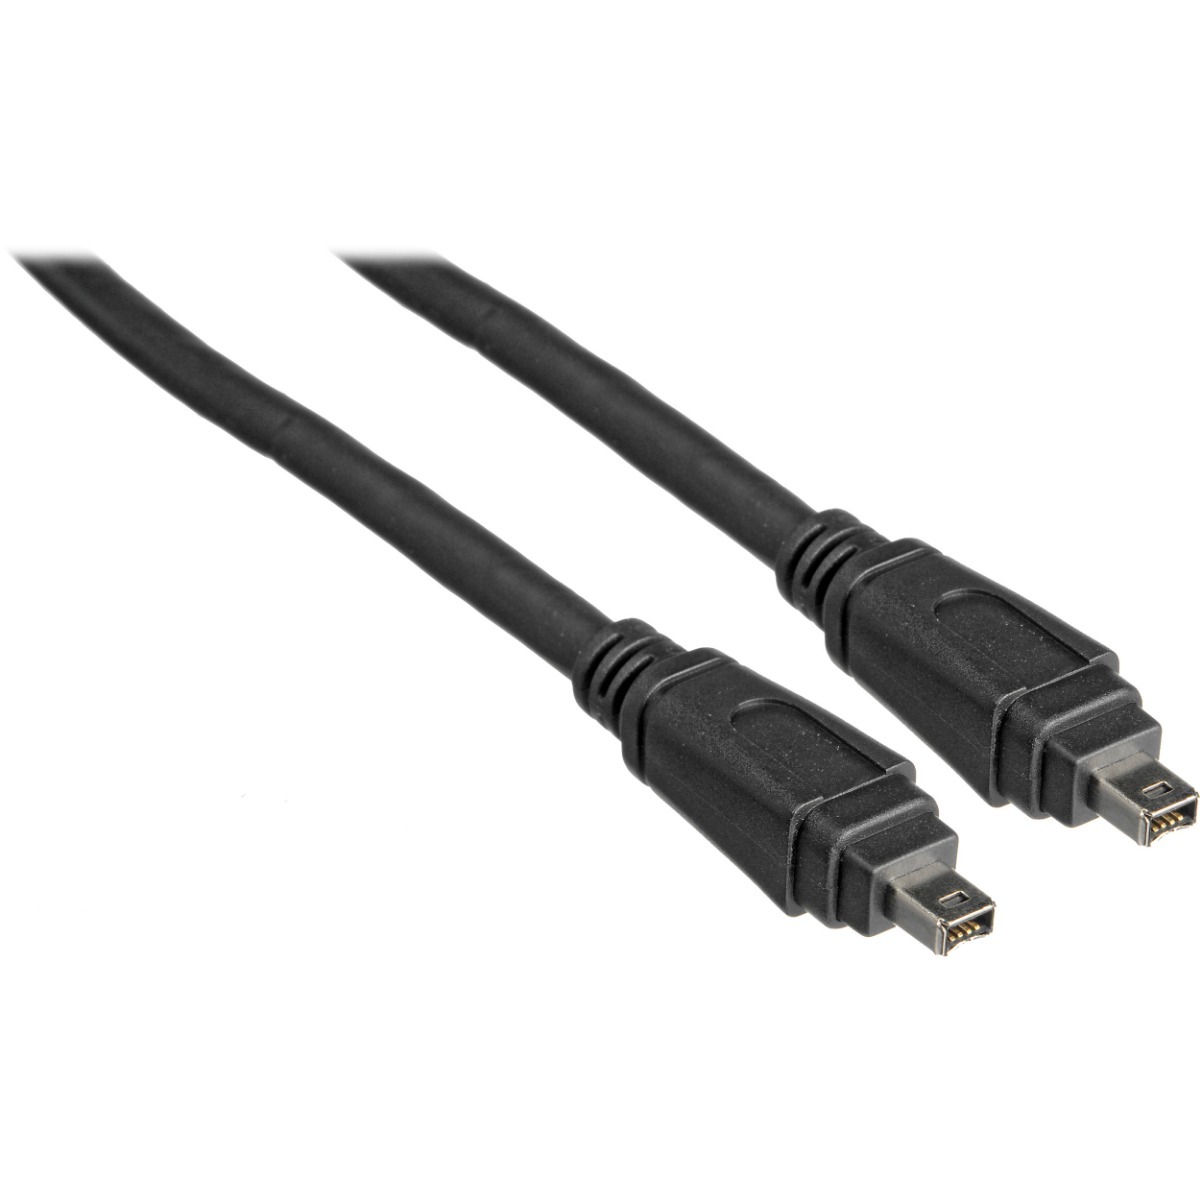 CABLE USB FIRE WIRE MANHATTAN 1.8M 323765, Cable